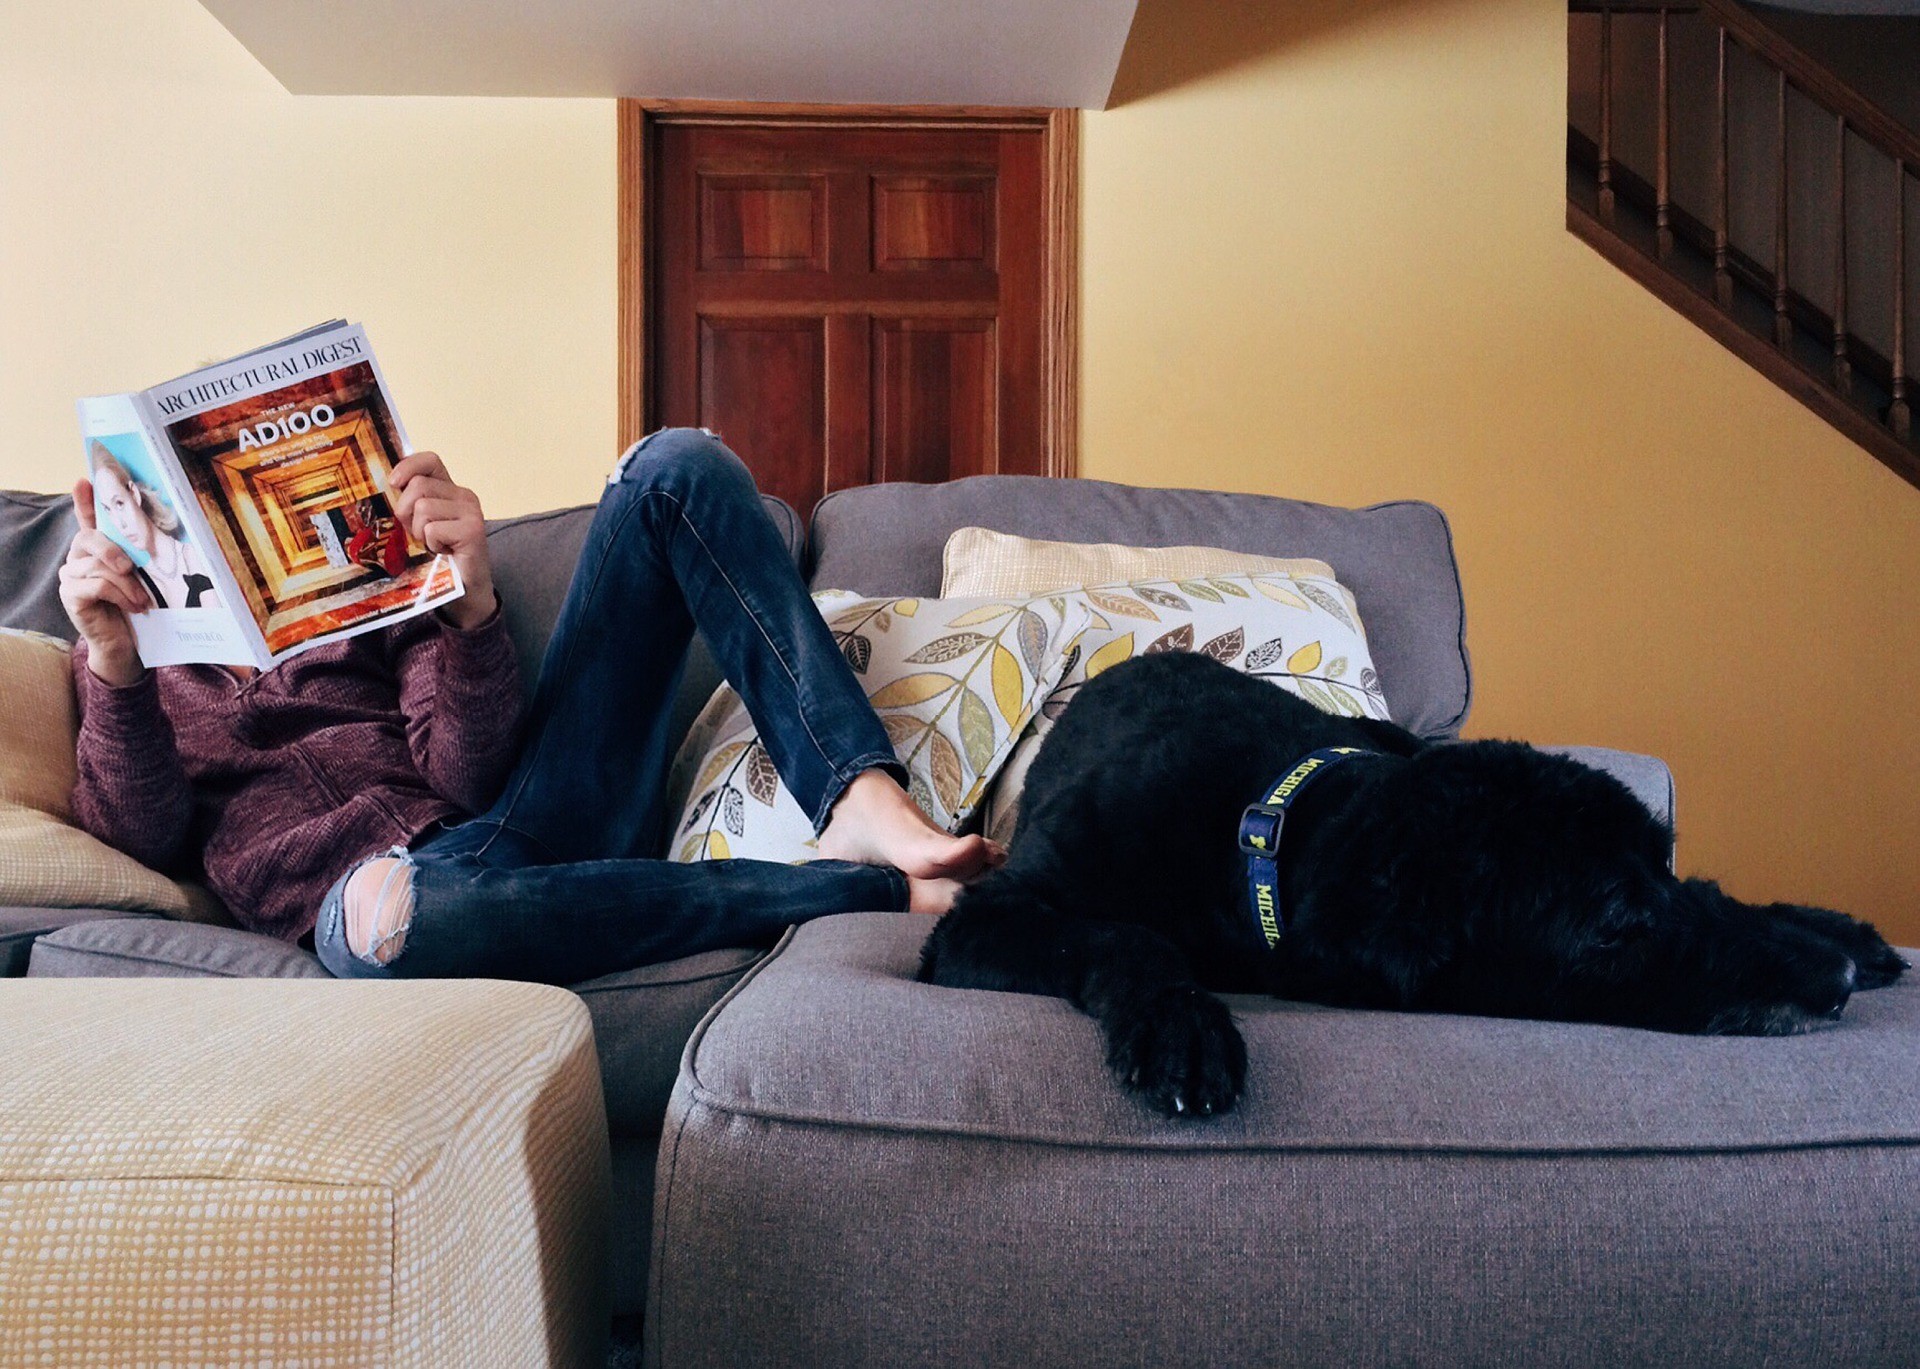 A Man sits on his couch with his dog while reading a magazine